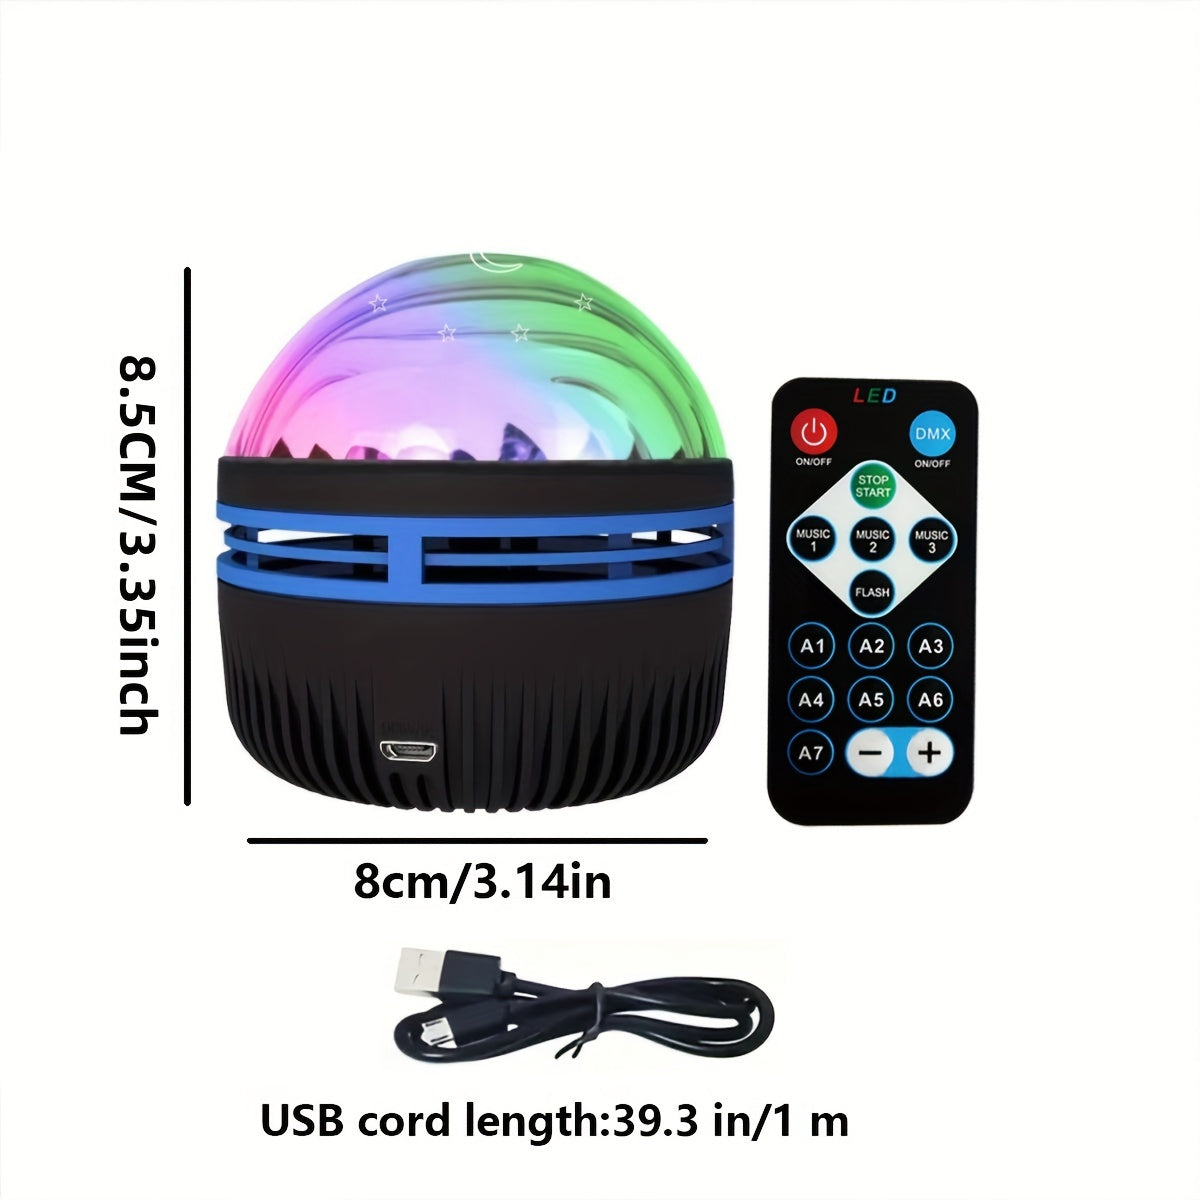 LED Northern Light Projector with Multicolor Pattern & Remote - Bedroom, Ceiling, Home Theater, Christmas/Valentine's Day Gift - Dimmable, Color Changing